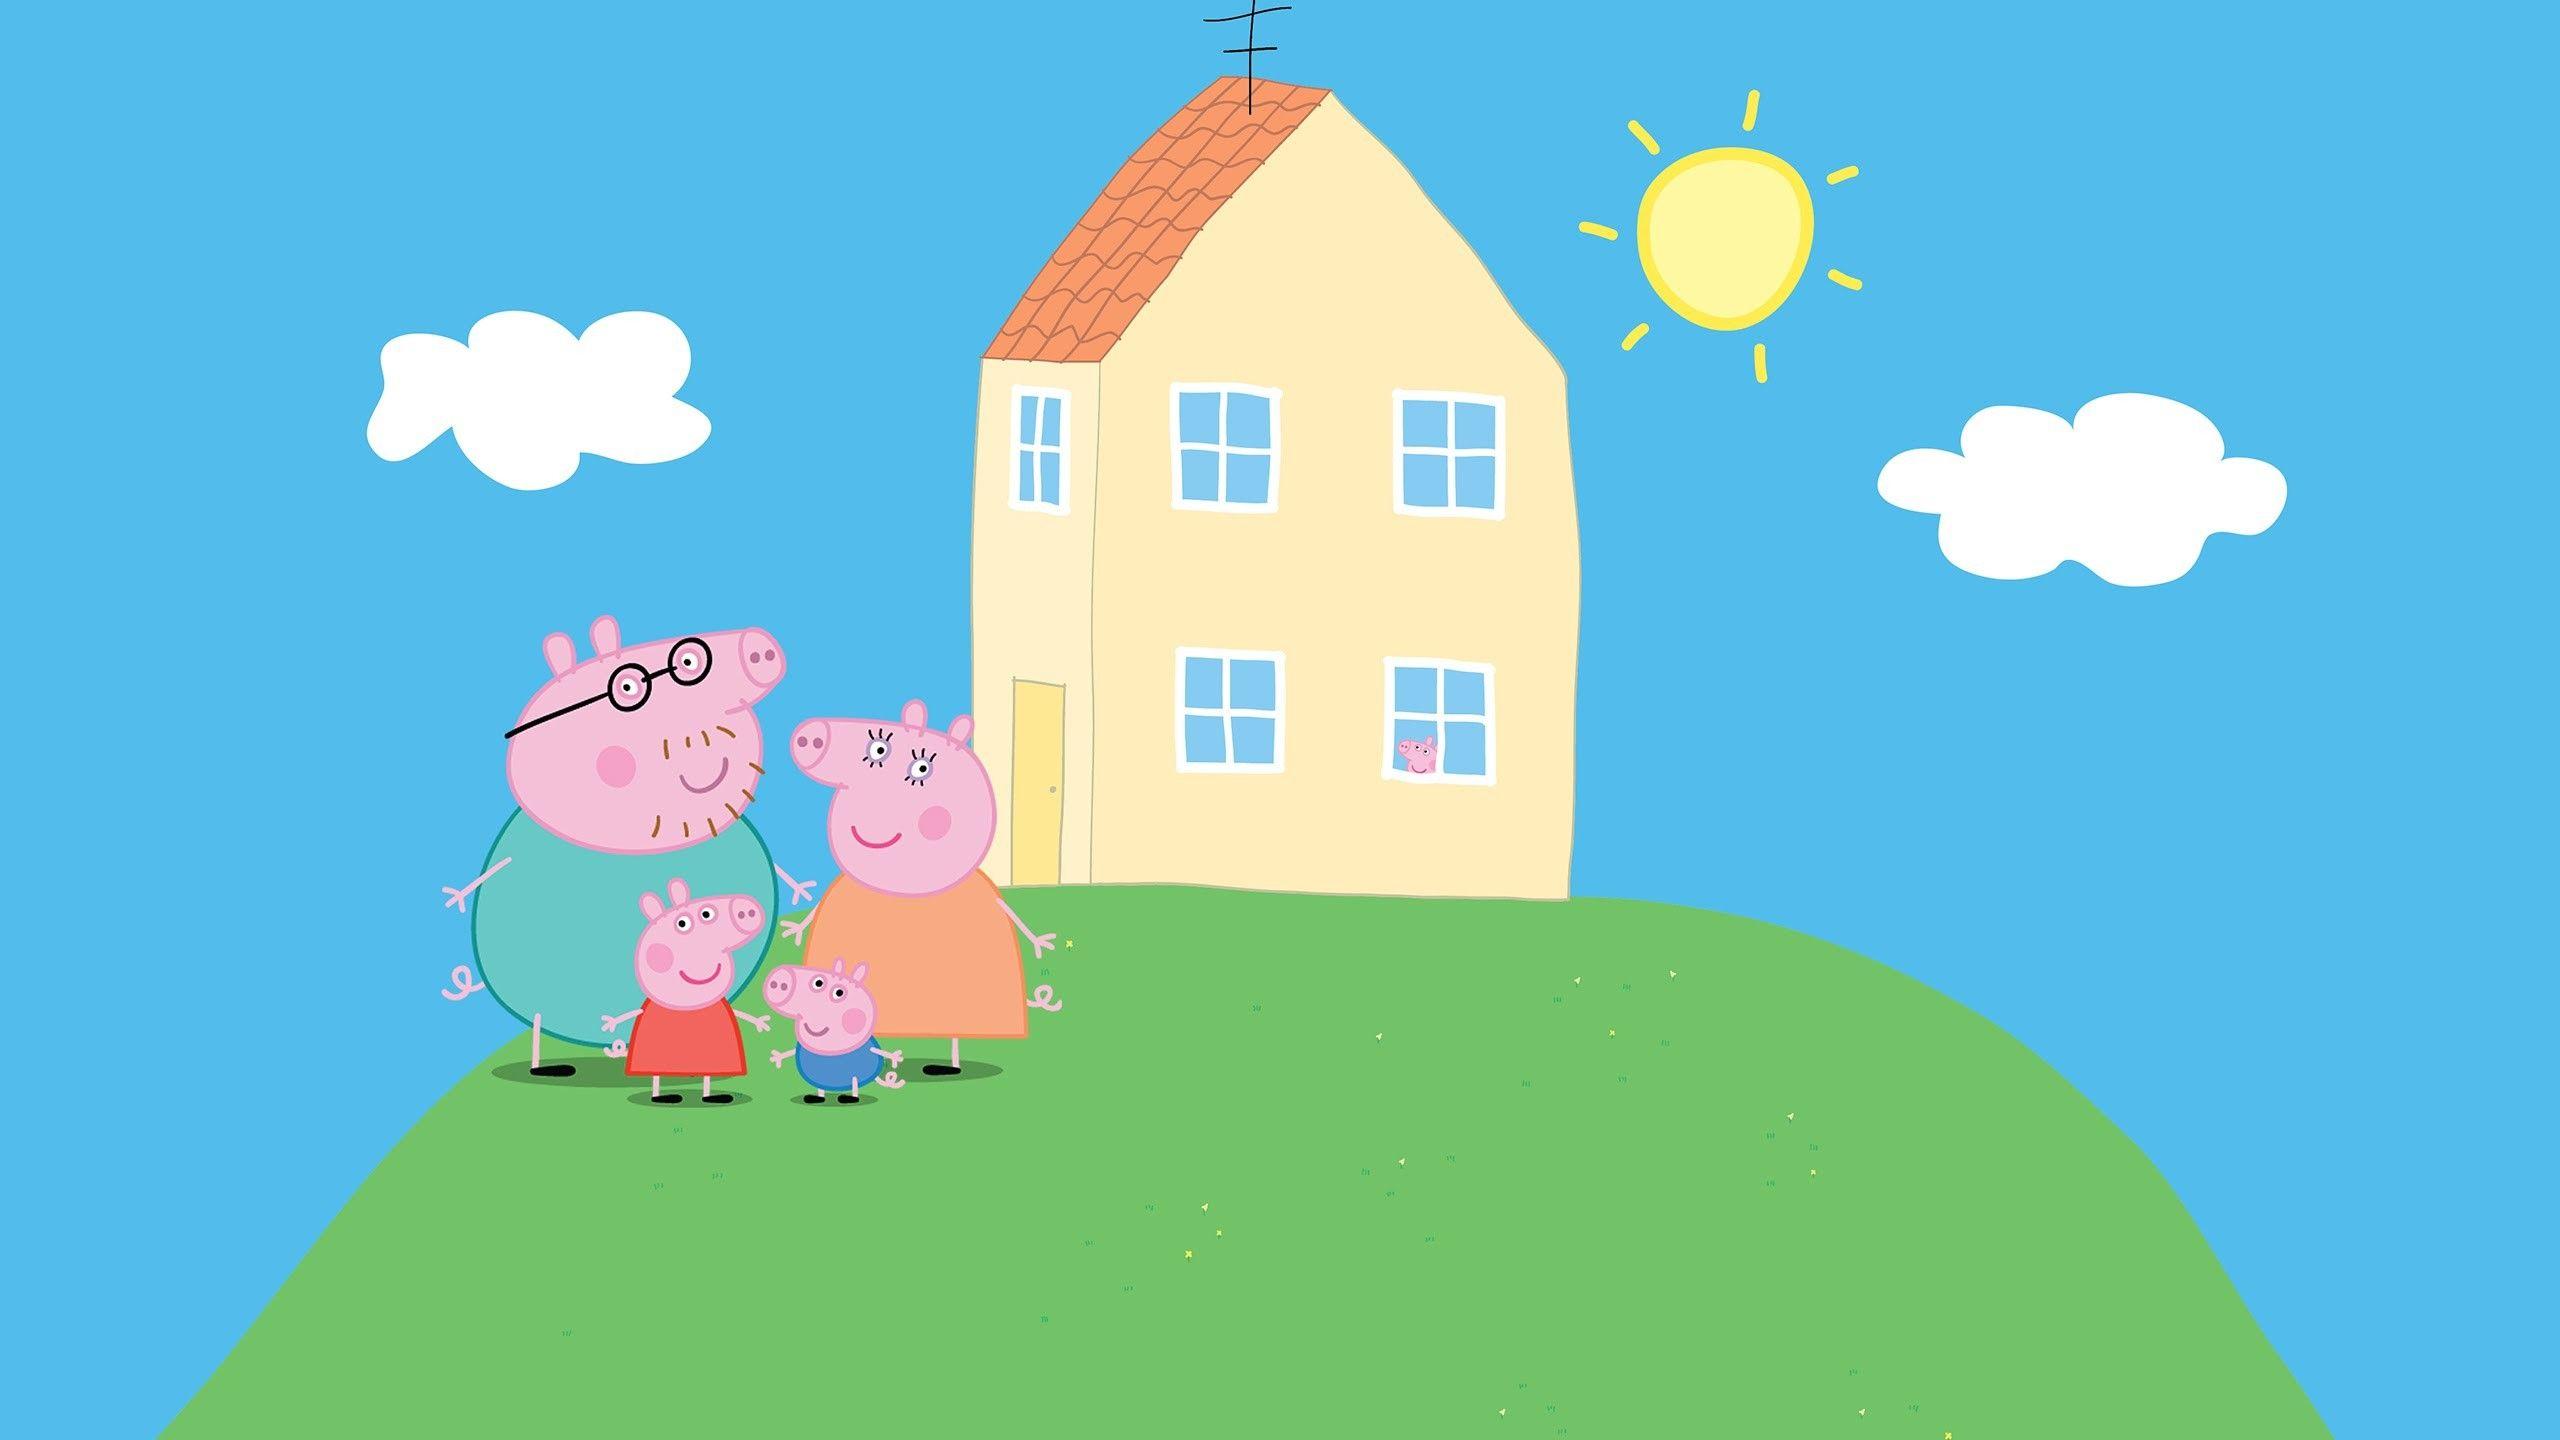 Peppa Pig House Wallpapers Top Free Peppa Pig House Backgrounds 